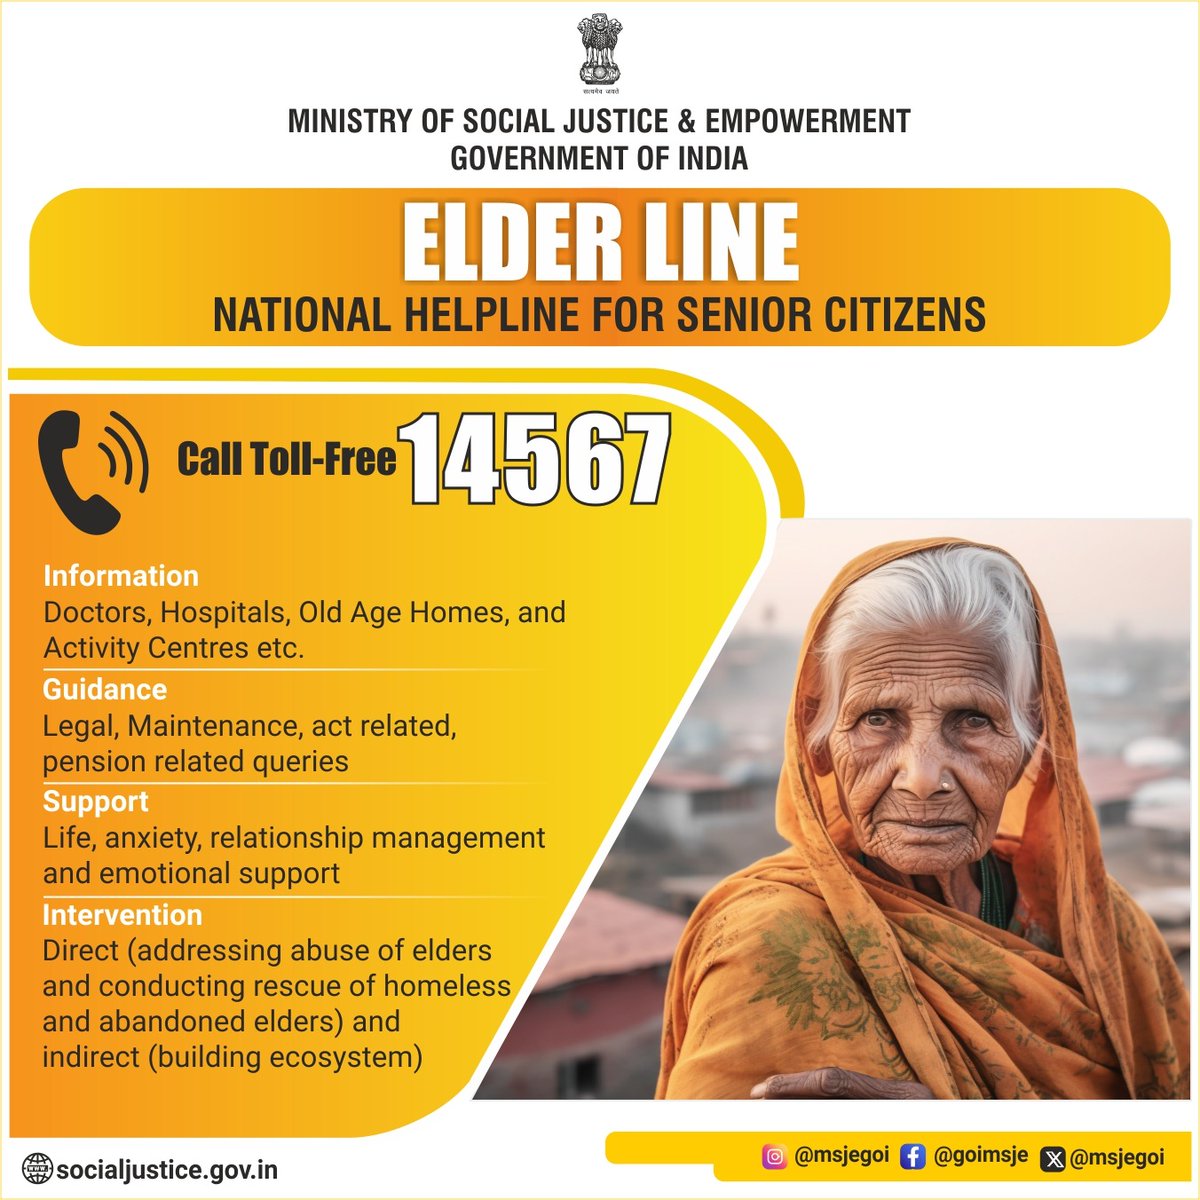 Need assistance with elderly care, pensions, legal advice, or concerned about elder abuse? 📞 Call Elder Line at 14567 – your national toll-free helpline dedicated to senior citizens.

#ElderCare #ReportElderAbuse
@MSJEGOI